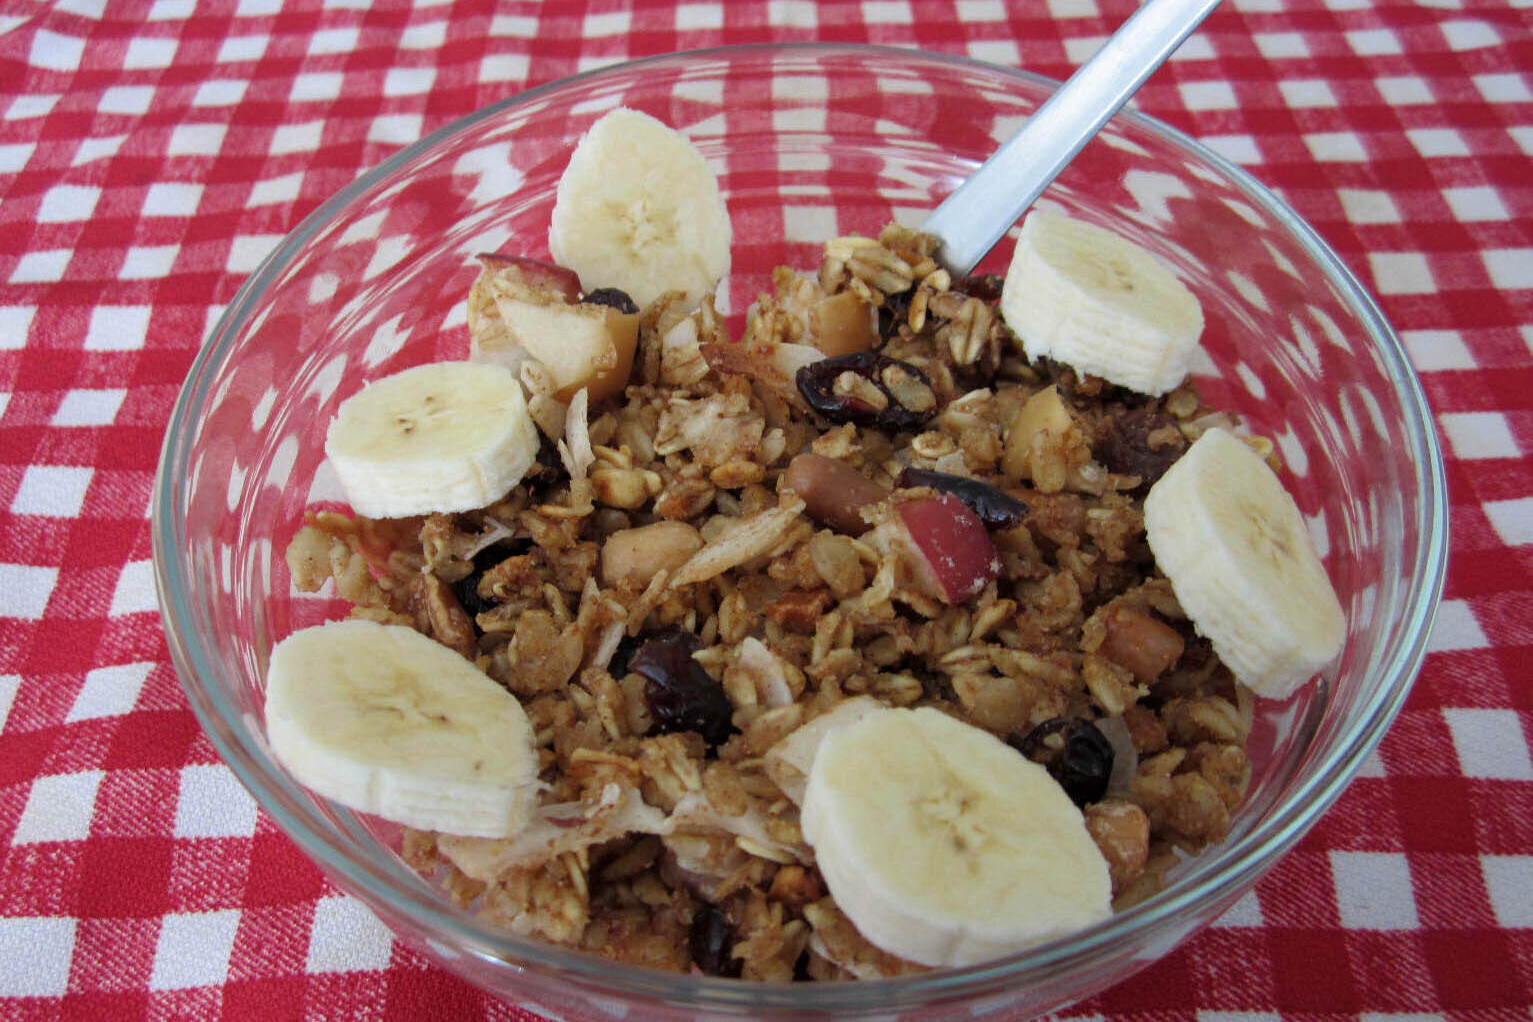 A bowl full of granola topped with sliced bananas